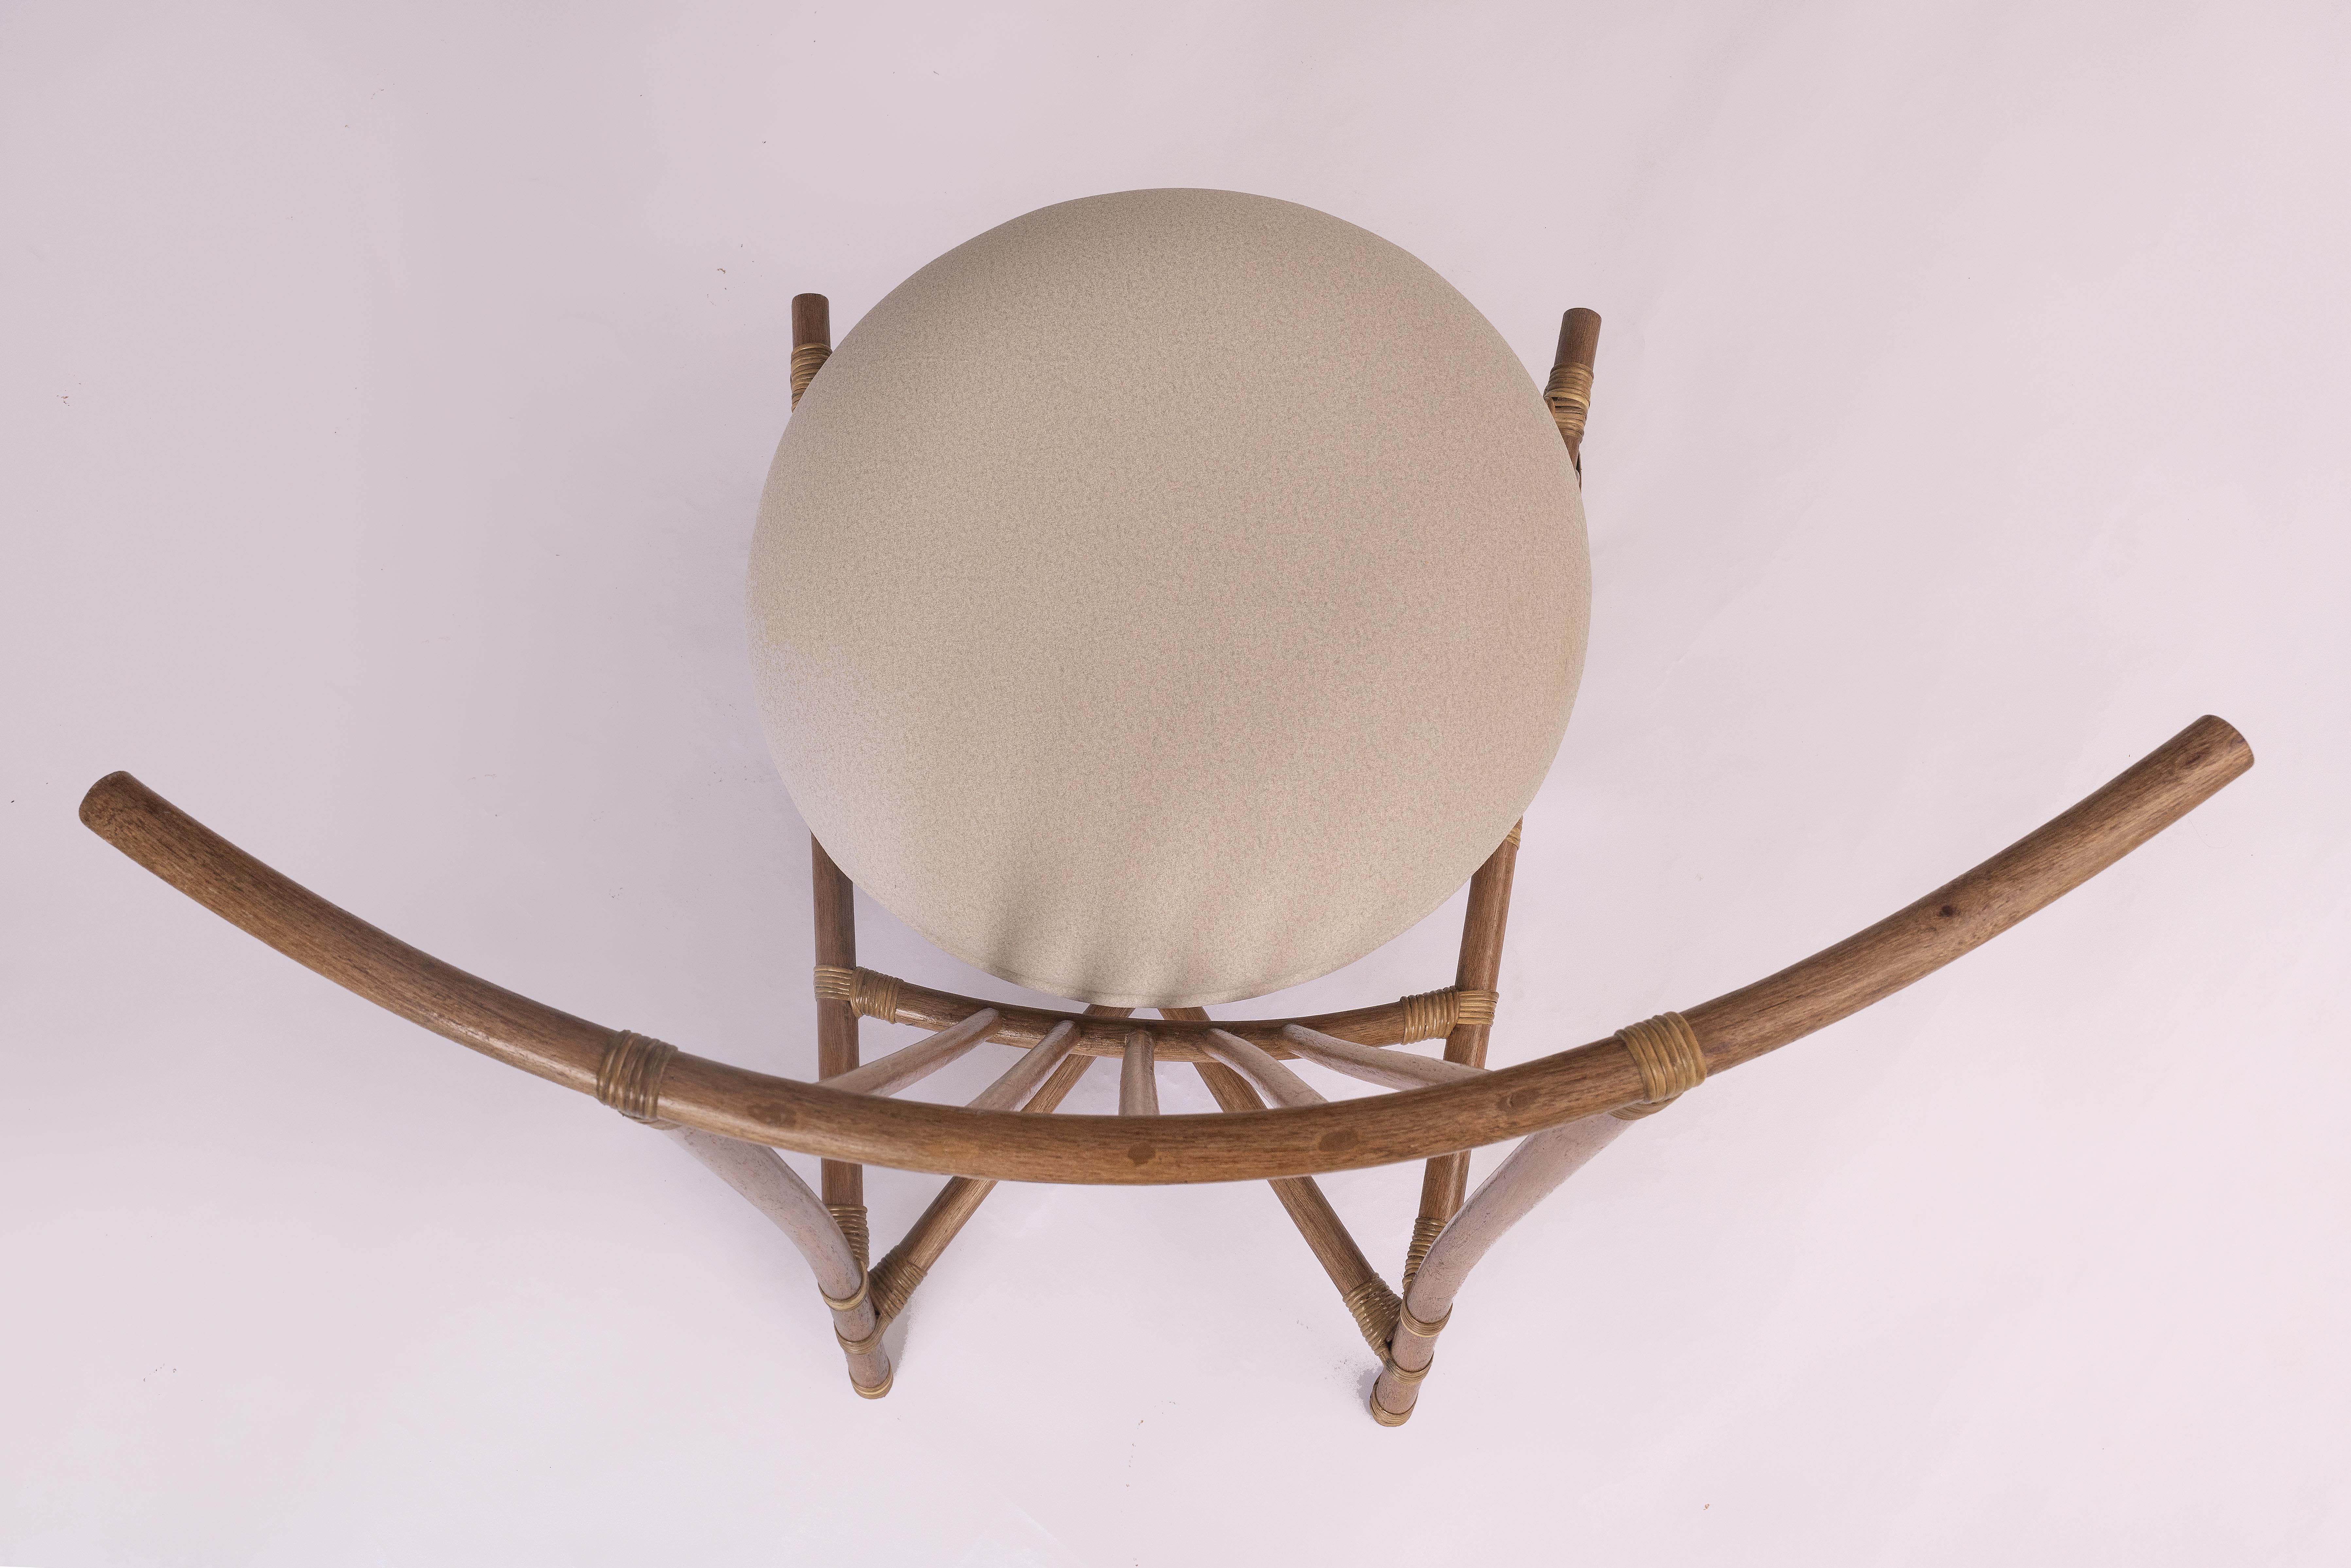 Felt Toro armchair made in Apuí Amazon Vine and designed by Tiago Curioni For Sale